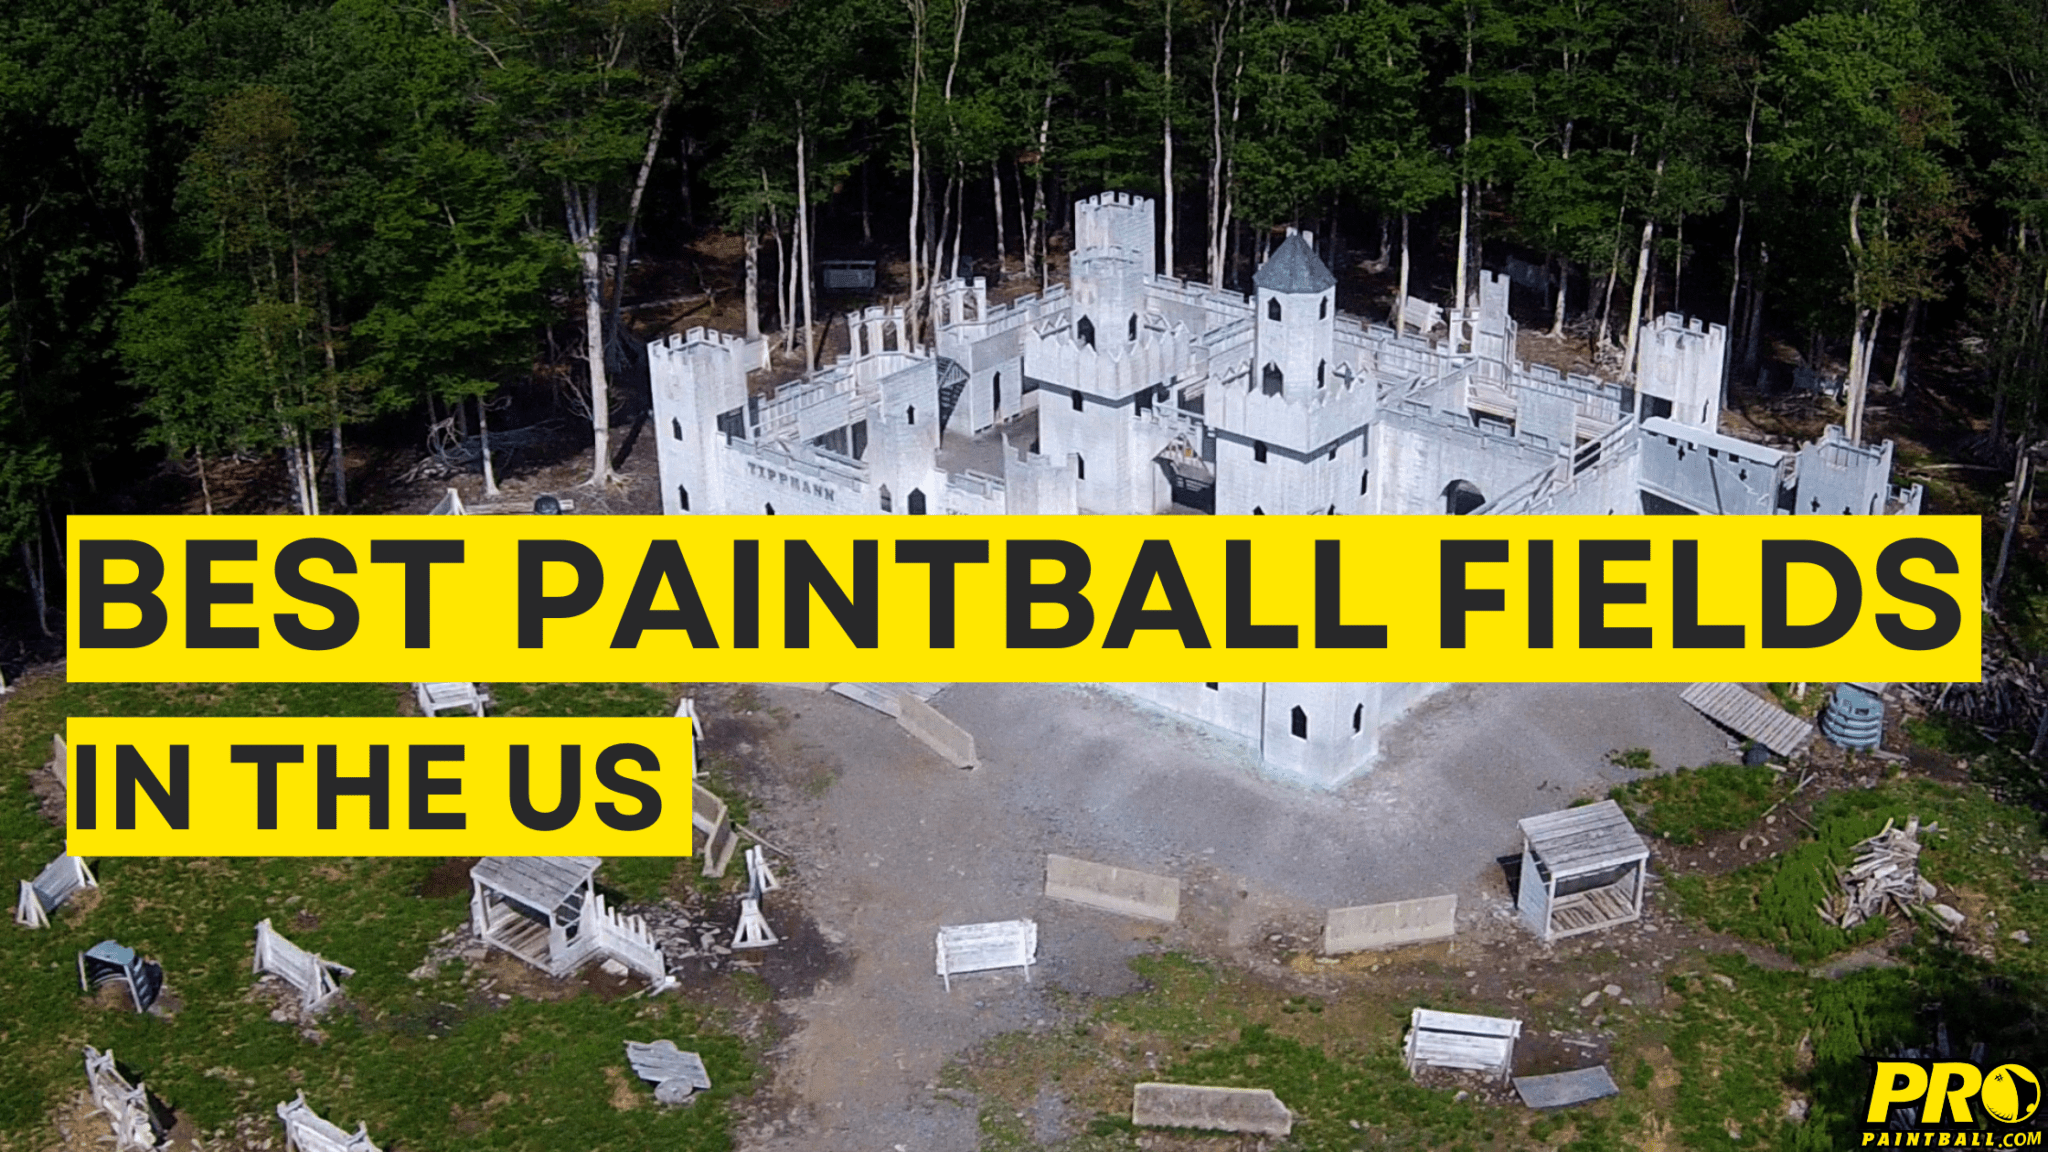 Best Paintball Fields to Experience High Adrenaline in the US